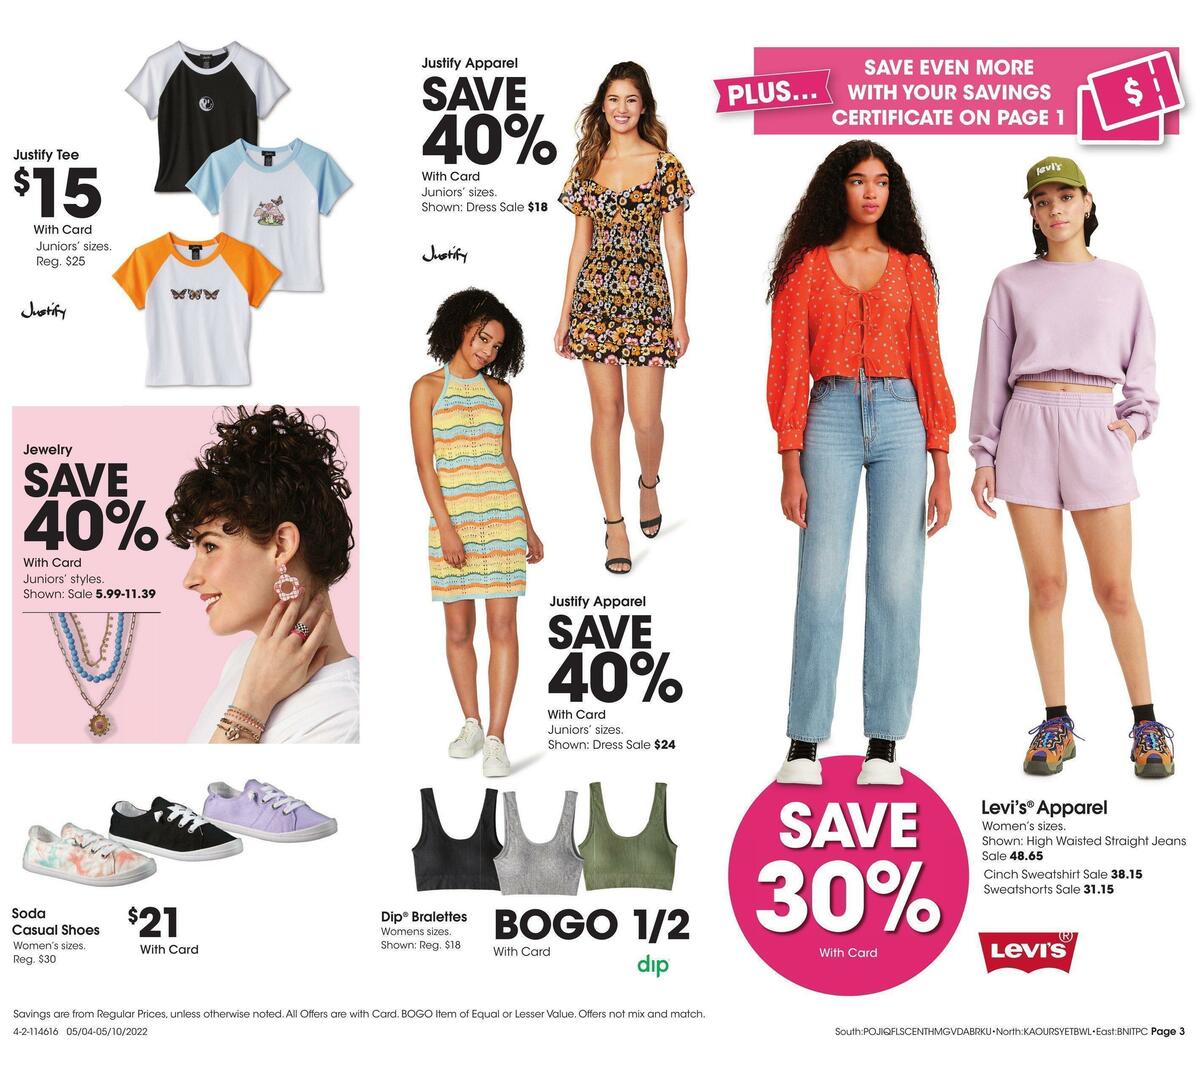 Fred Meyer General Merchandise Weekly Ad from May 4